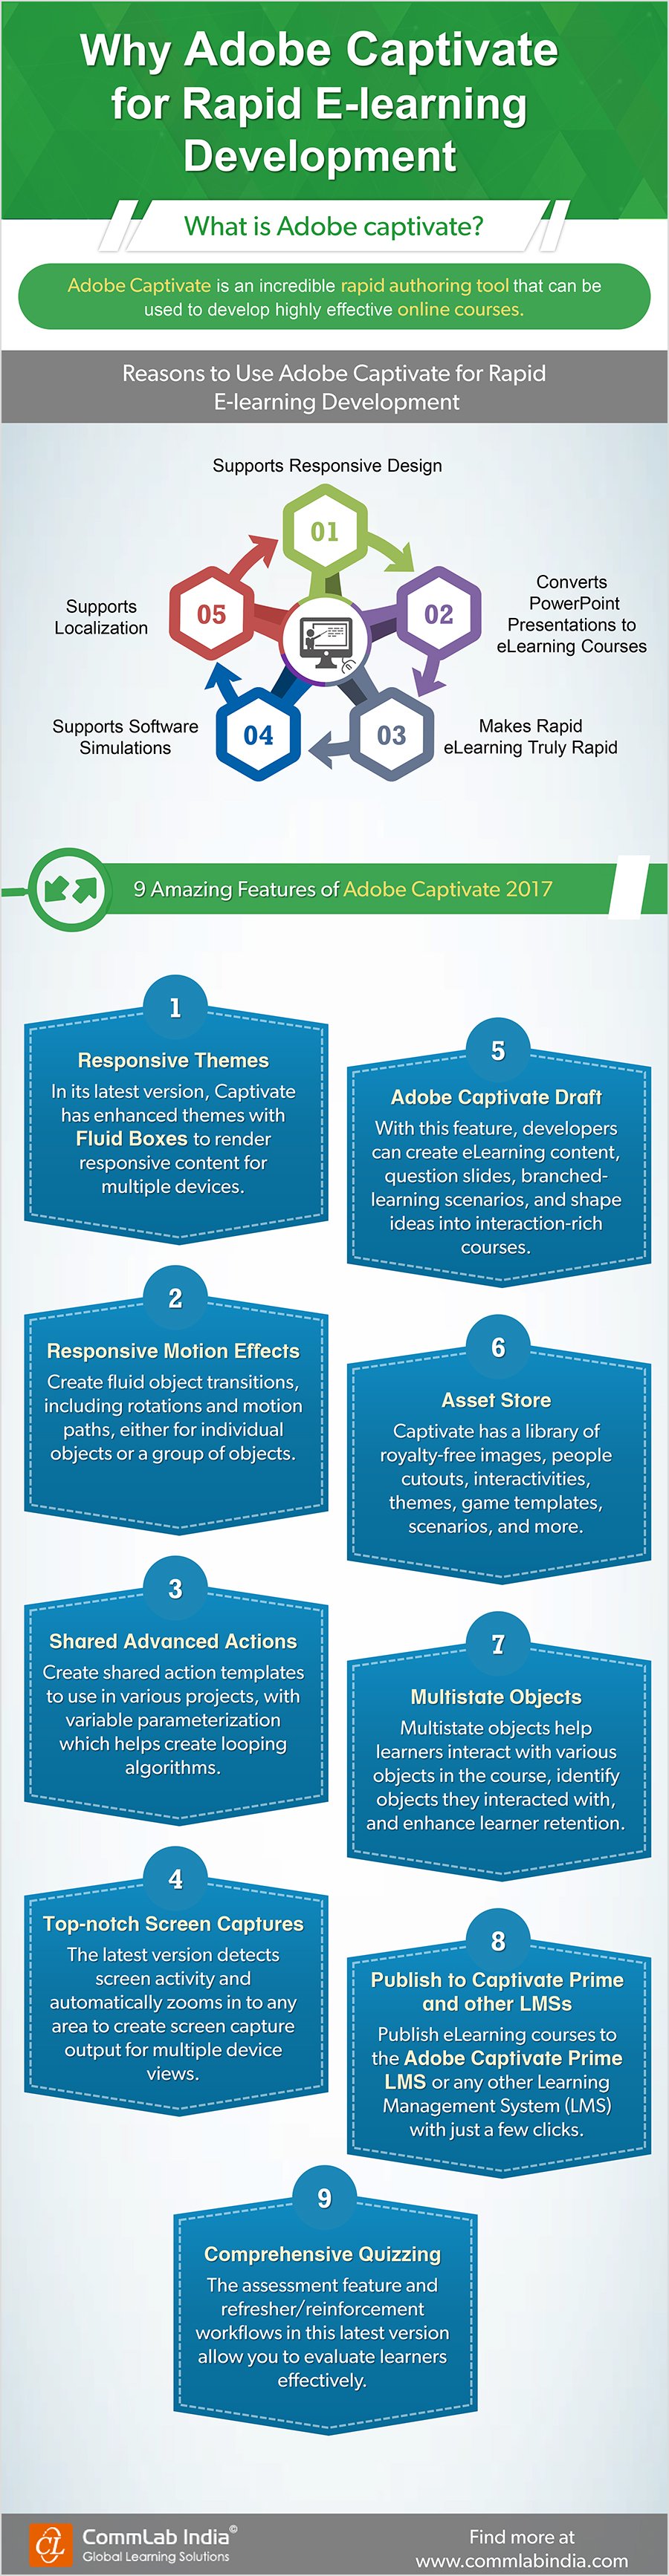 Reasons to Use Adobe Captivate for Rapid eLearning Development